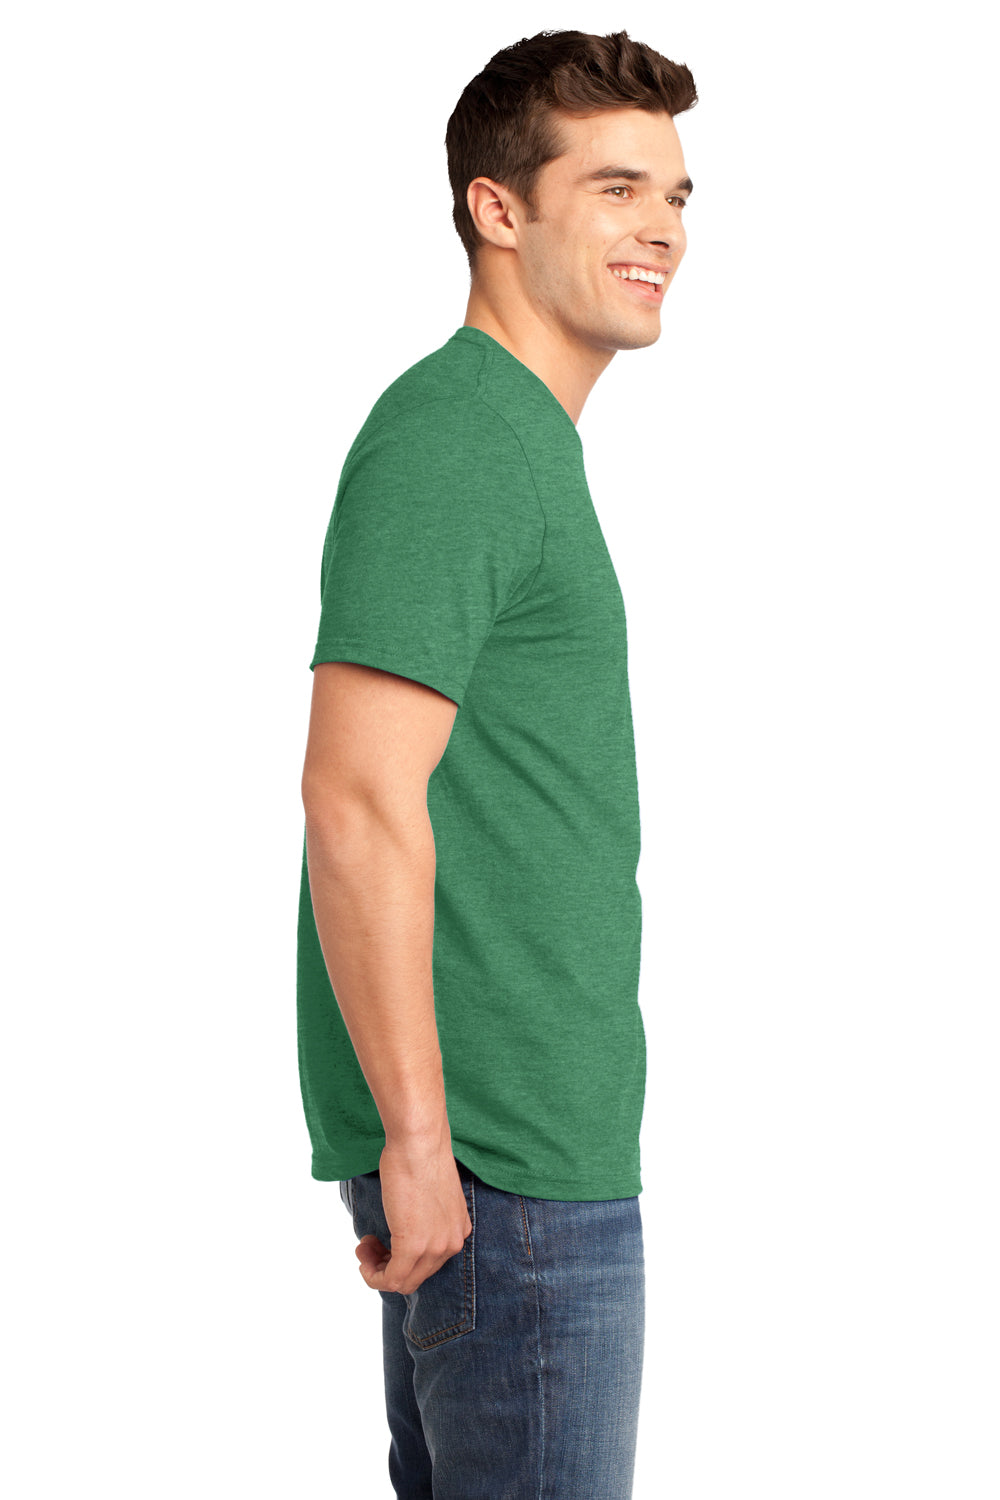 District DT6000 Mens Very Important Short Sleeve Crewneck T-Shirt Heather Kelly Green Side